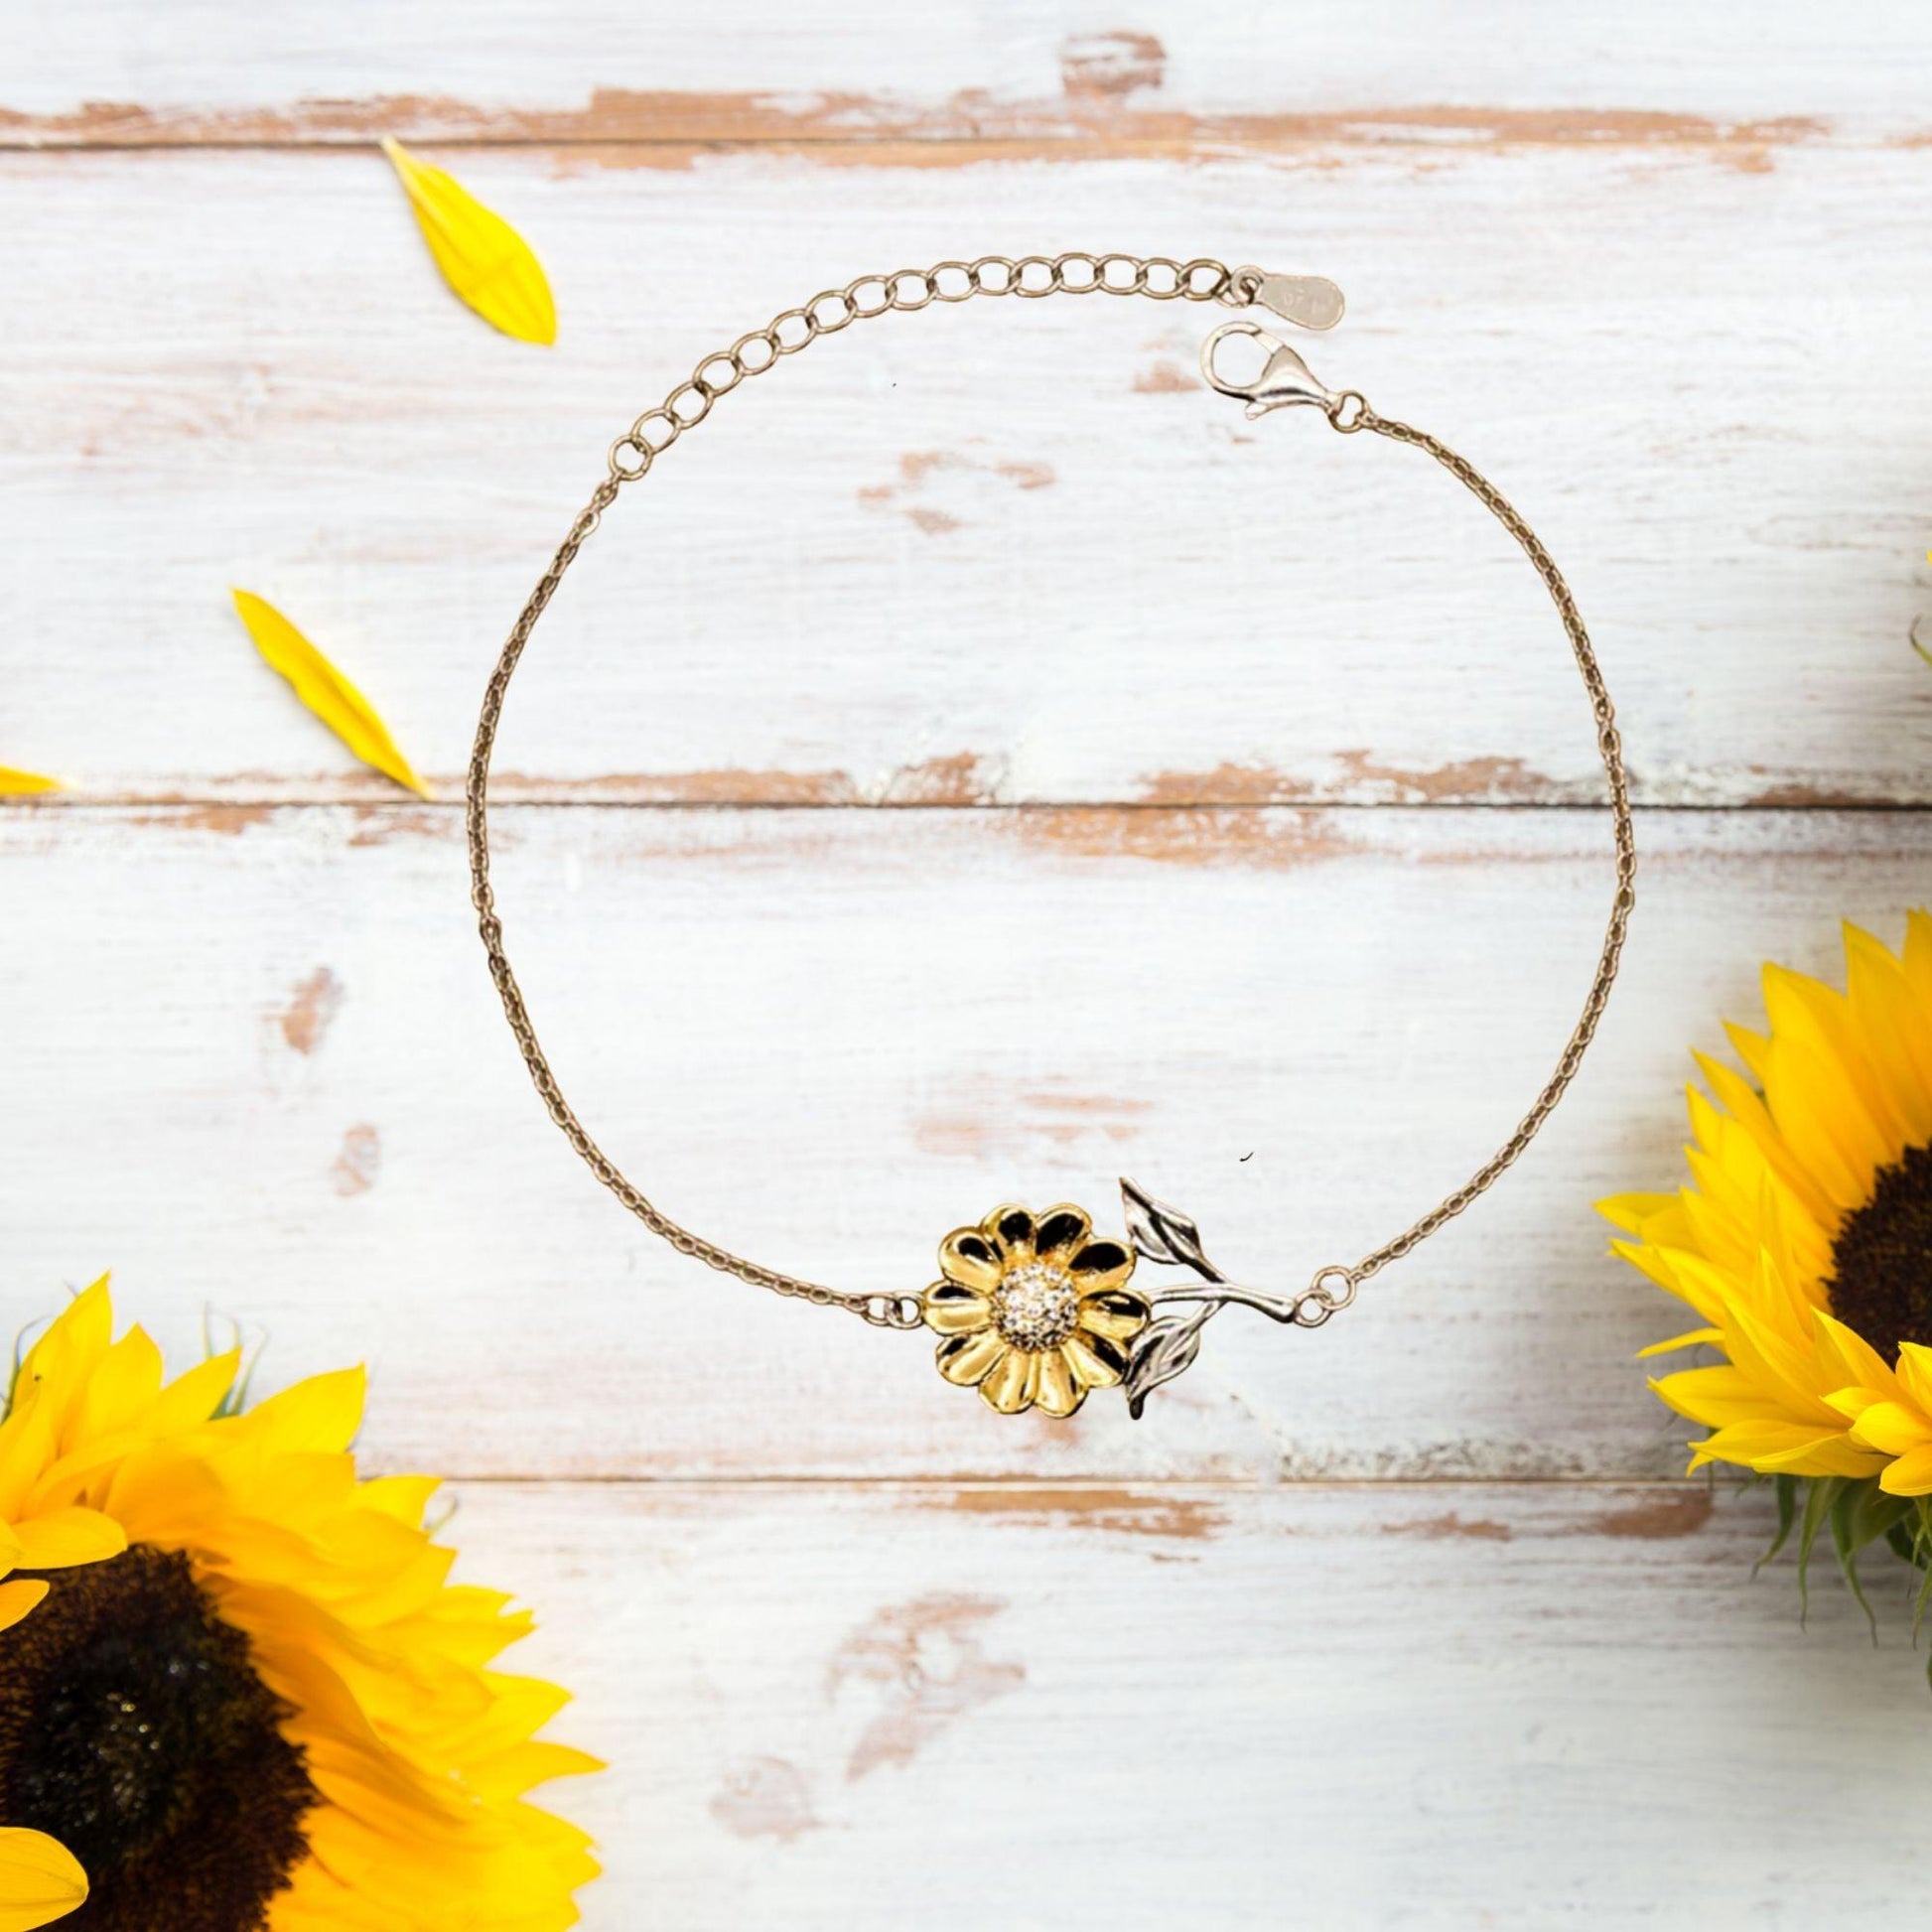 Motivational Goddaughter Sunflower Bracelet - I can promise to love you for the rest of my life, Birthday, Christmas Holiday Jewelry Gift - Mallard Moon Gift Shop